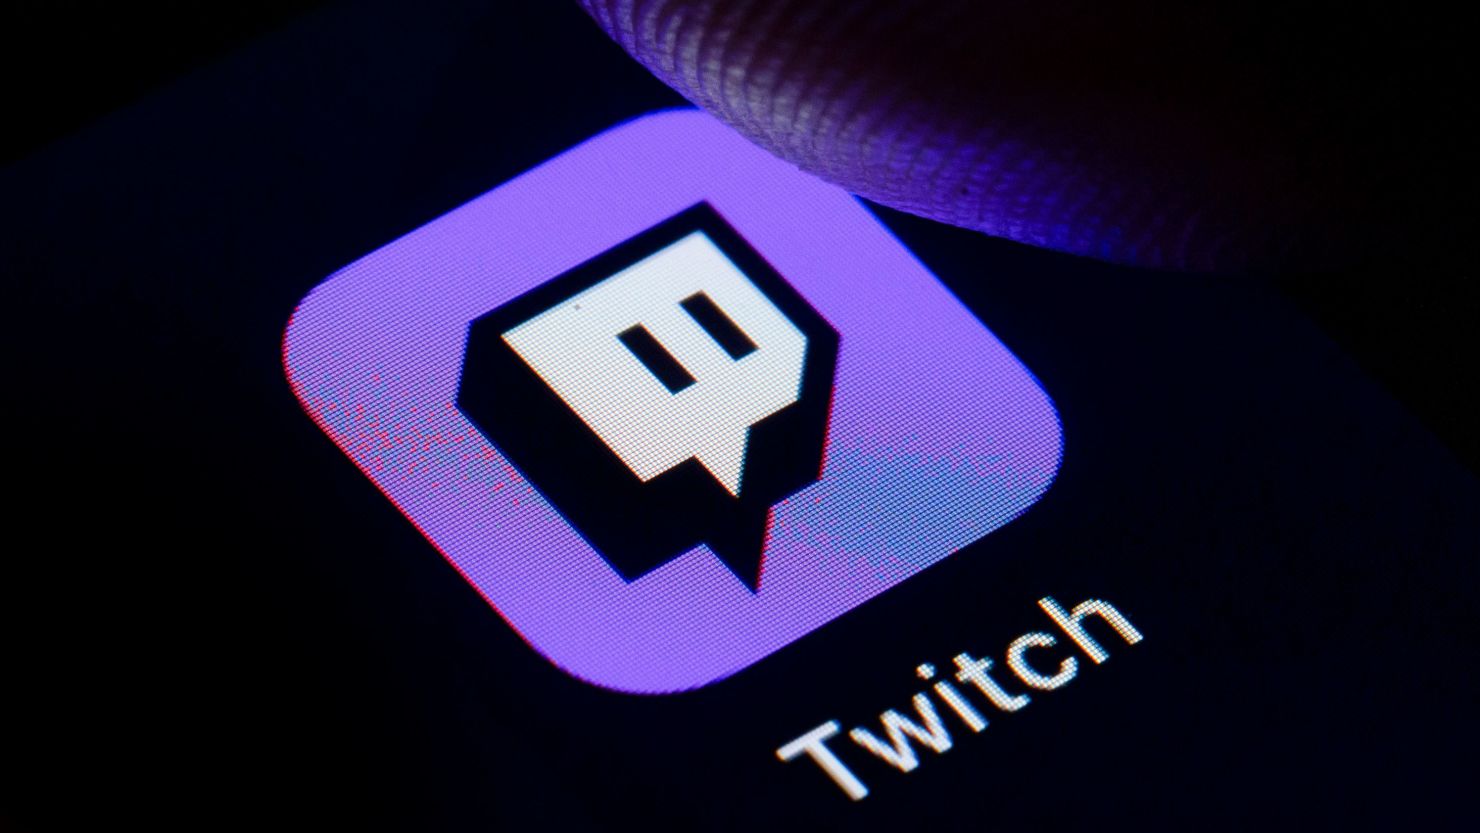 BERLIN, GERMANY - OCTOBER 11: In this photo illustration the logo of live streaming video platform Twitch is displayed on a smartphone on October 11, 2019 in Berlin, Germany. (Photo Illustration by Thomas Trutschel/Photothek via Getty Images)